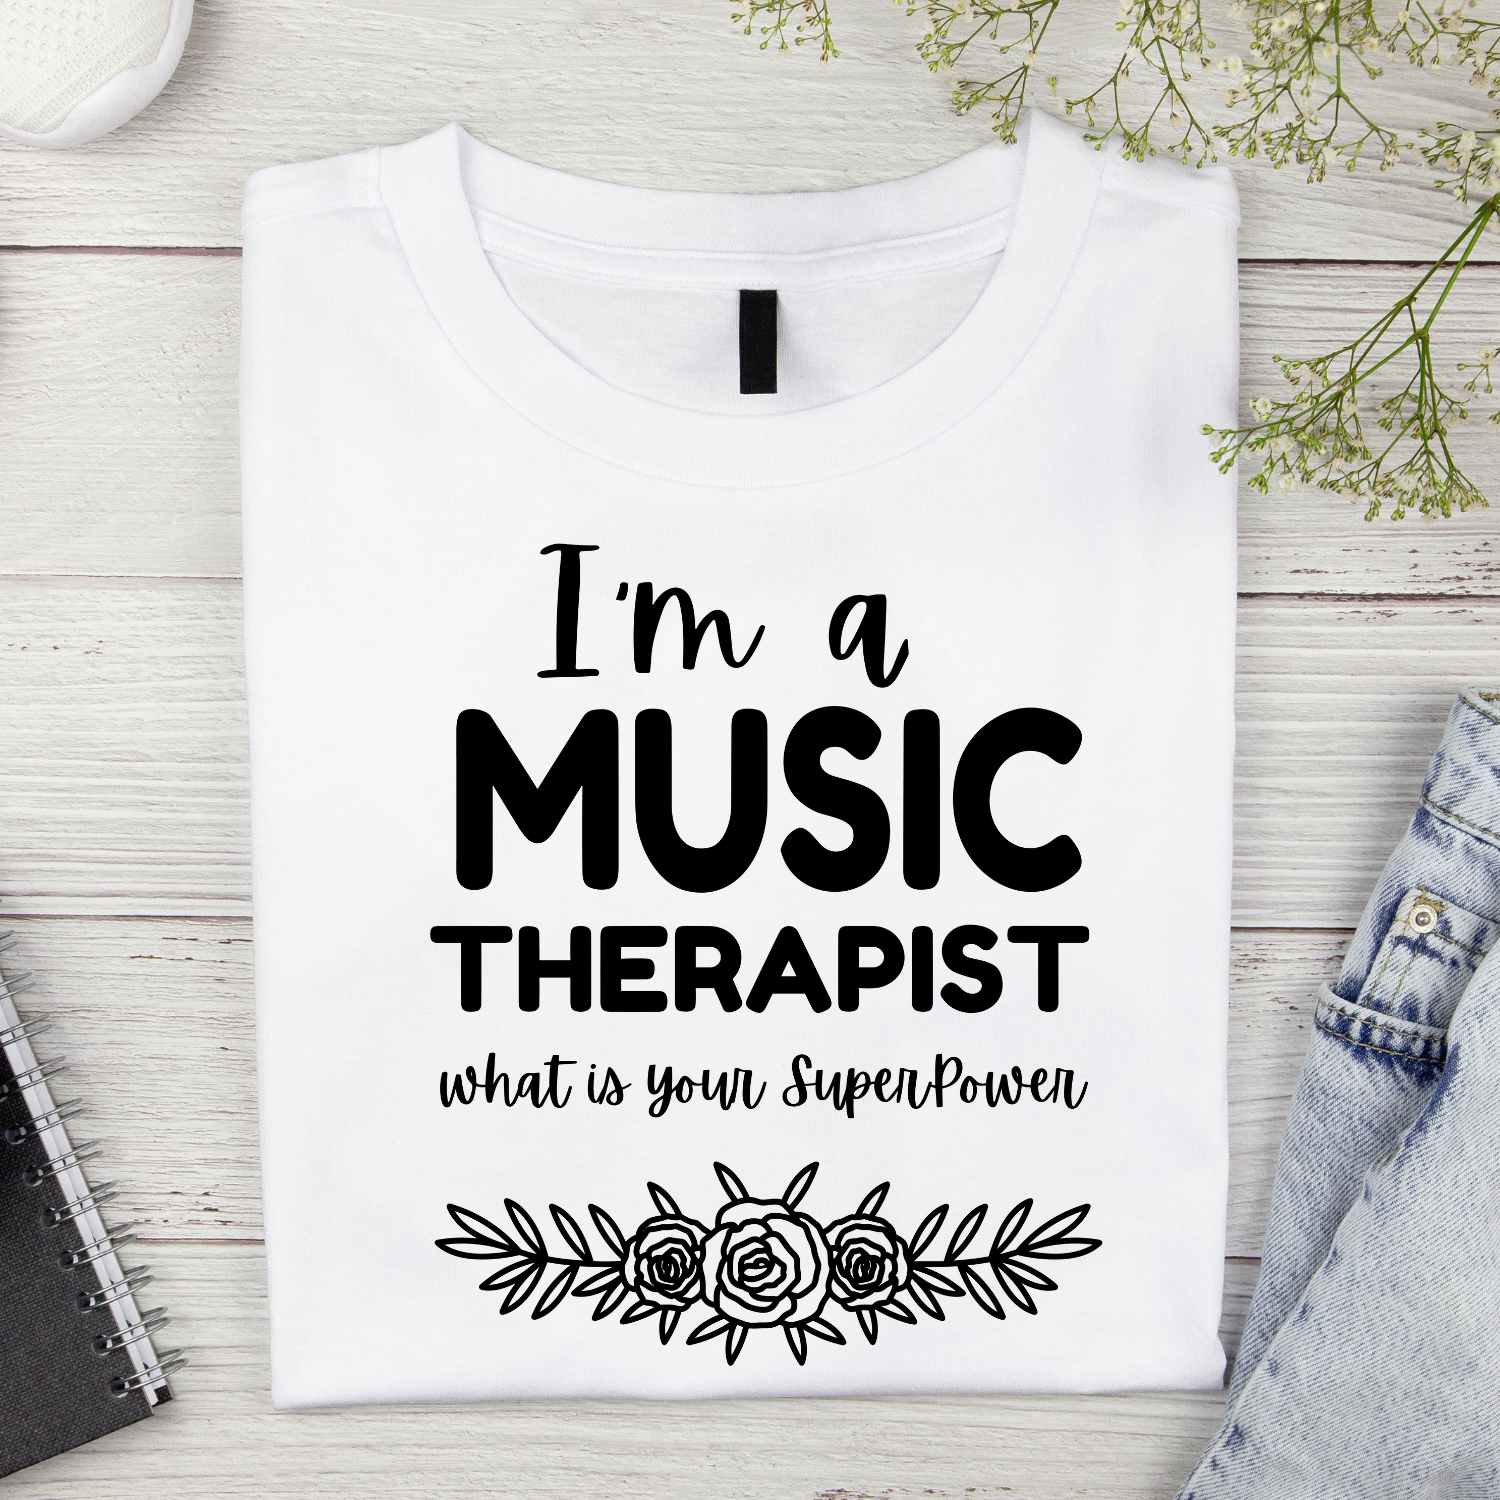 I am a Music Therapist what is your Superpower T-shirt Design